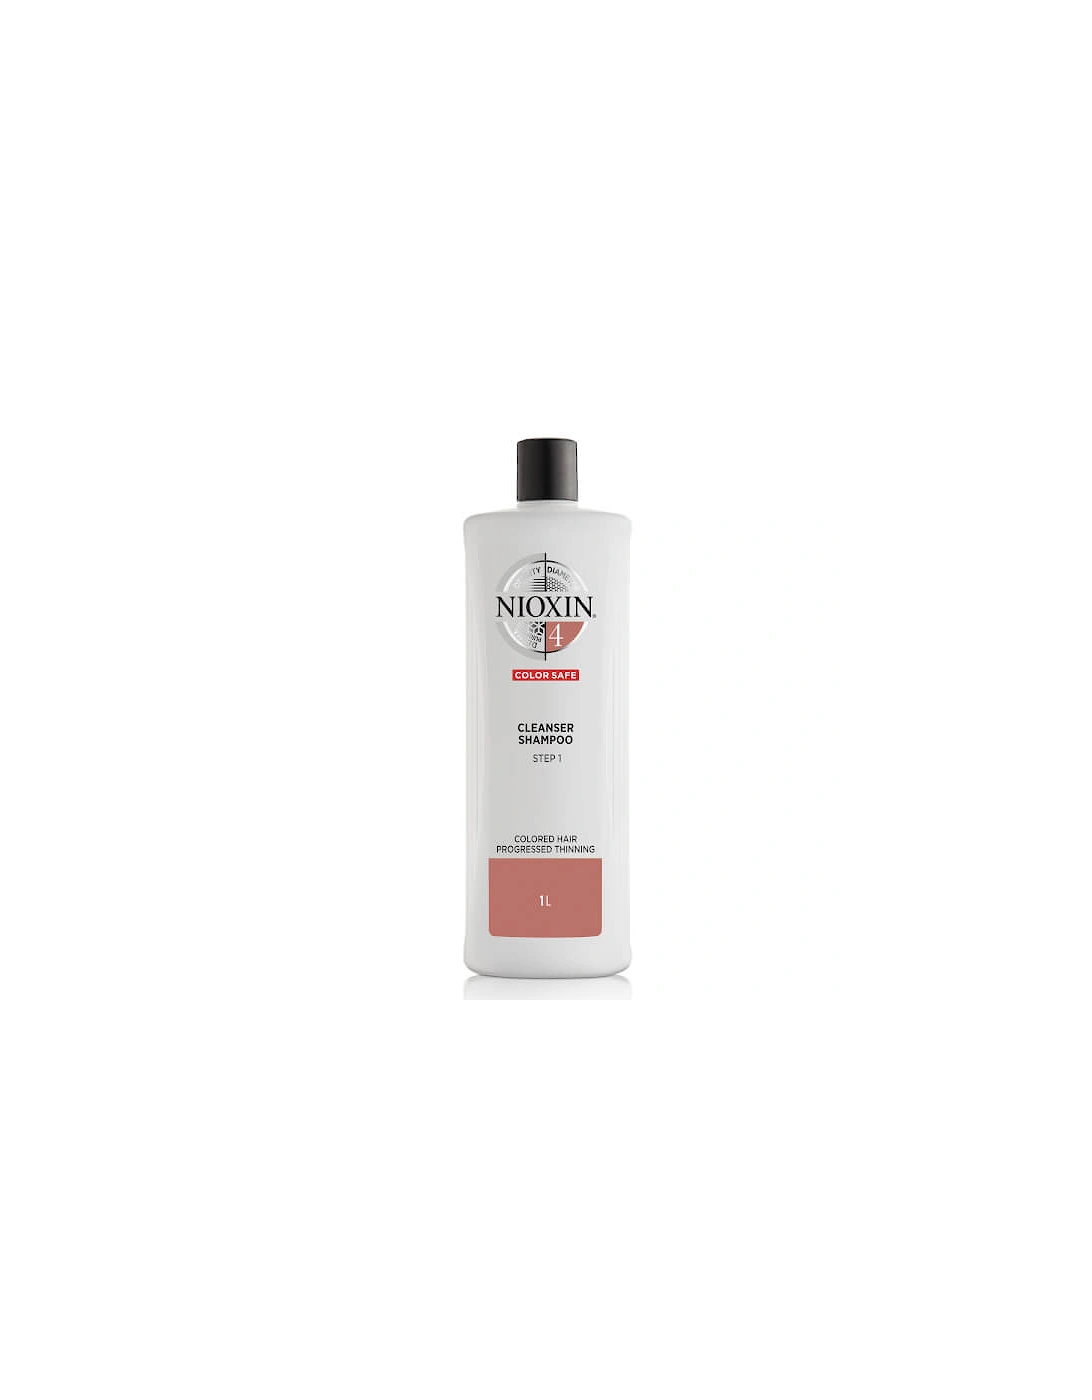 3-Part System 4 Cleanser Shampoo for Coloured Hair with Progressed Thinning 1000ml, 2 of 1